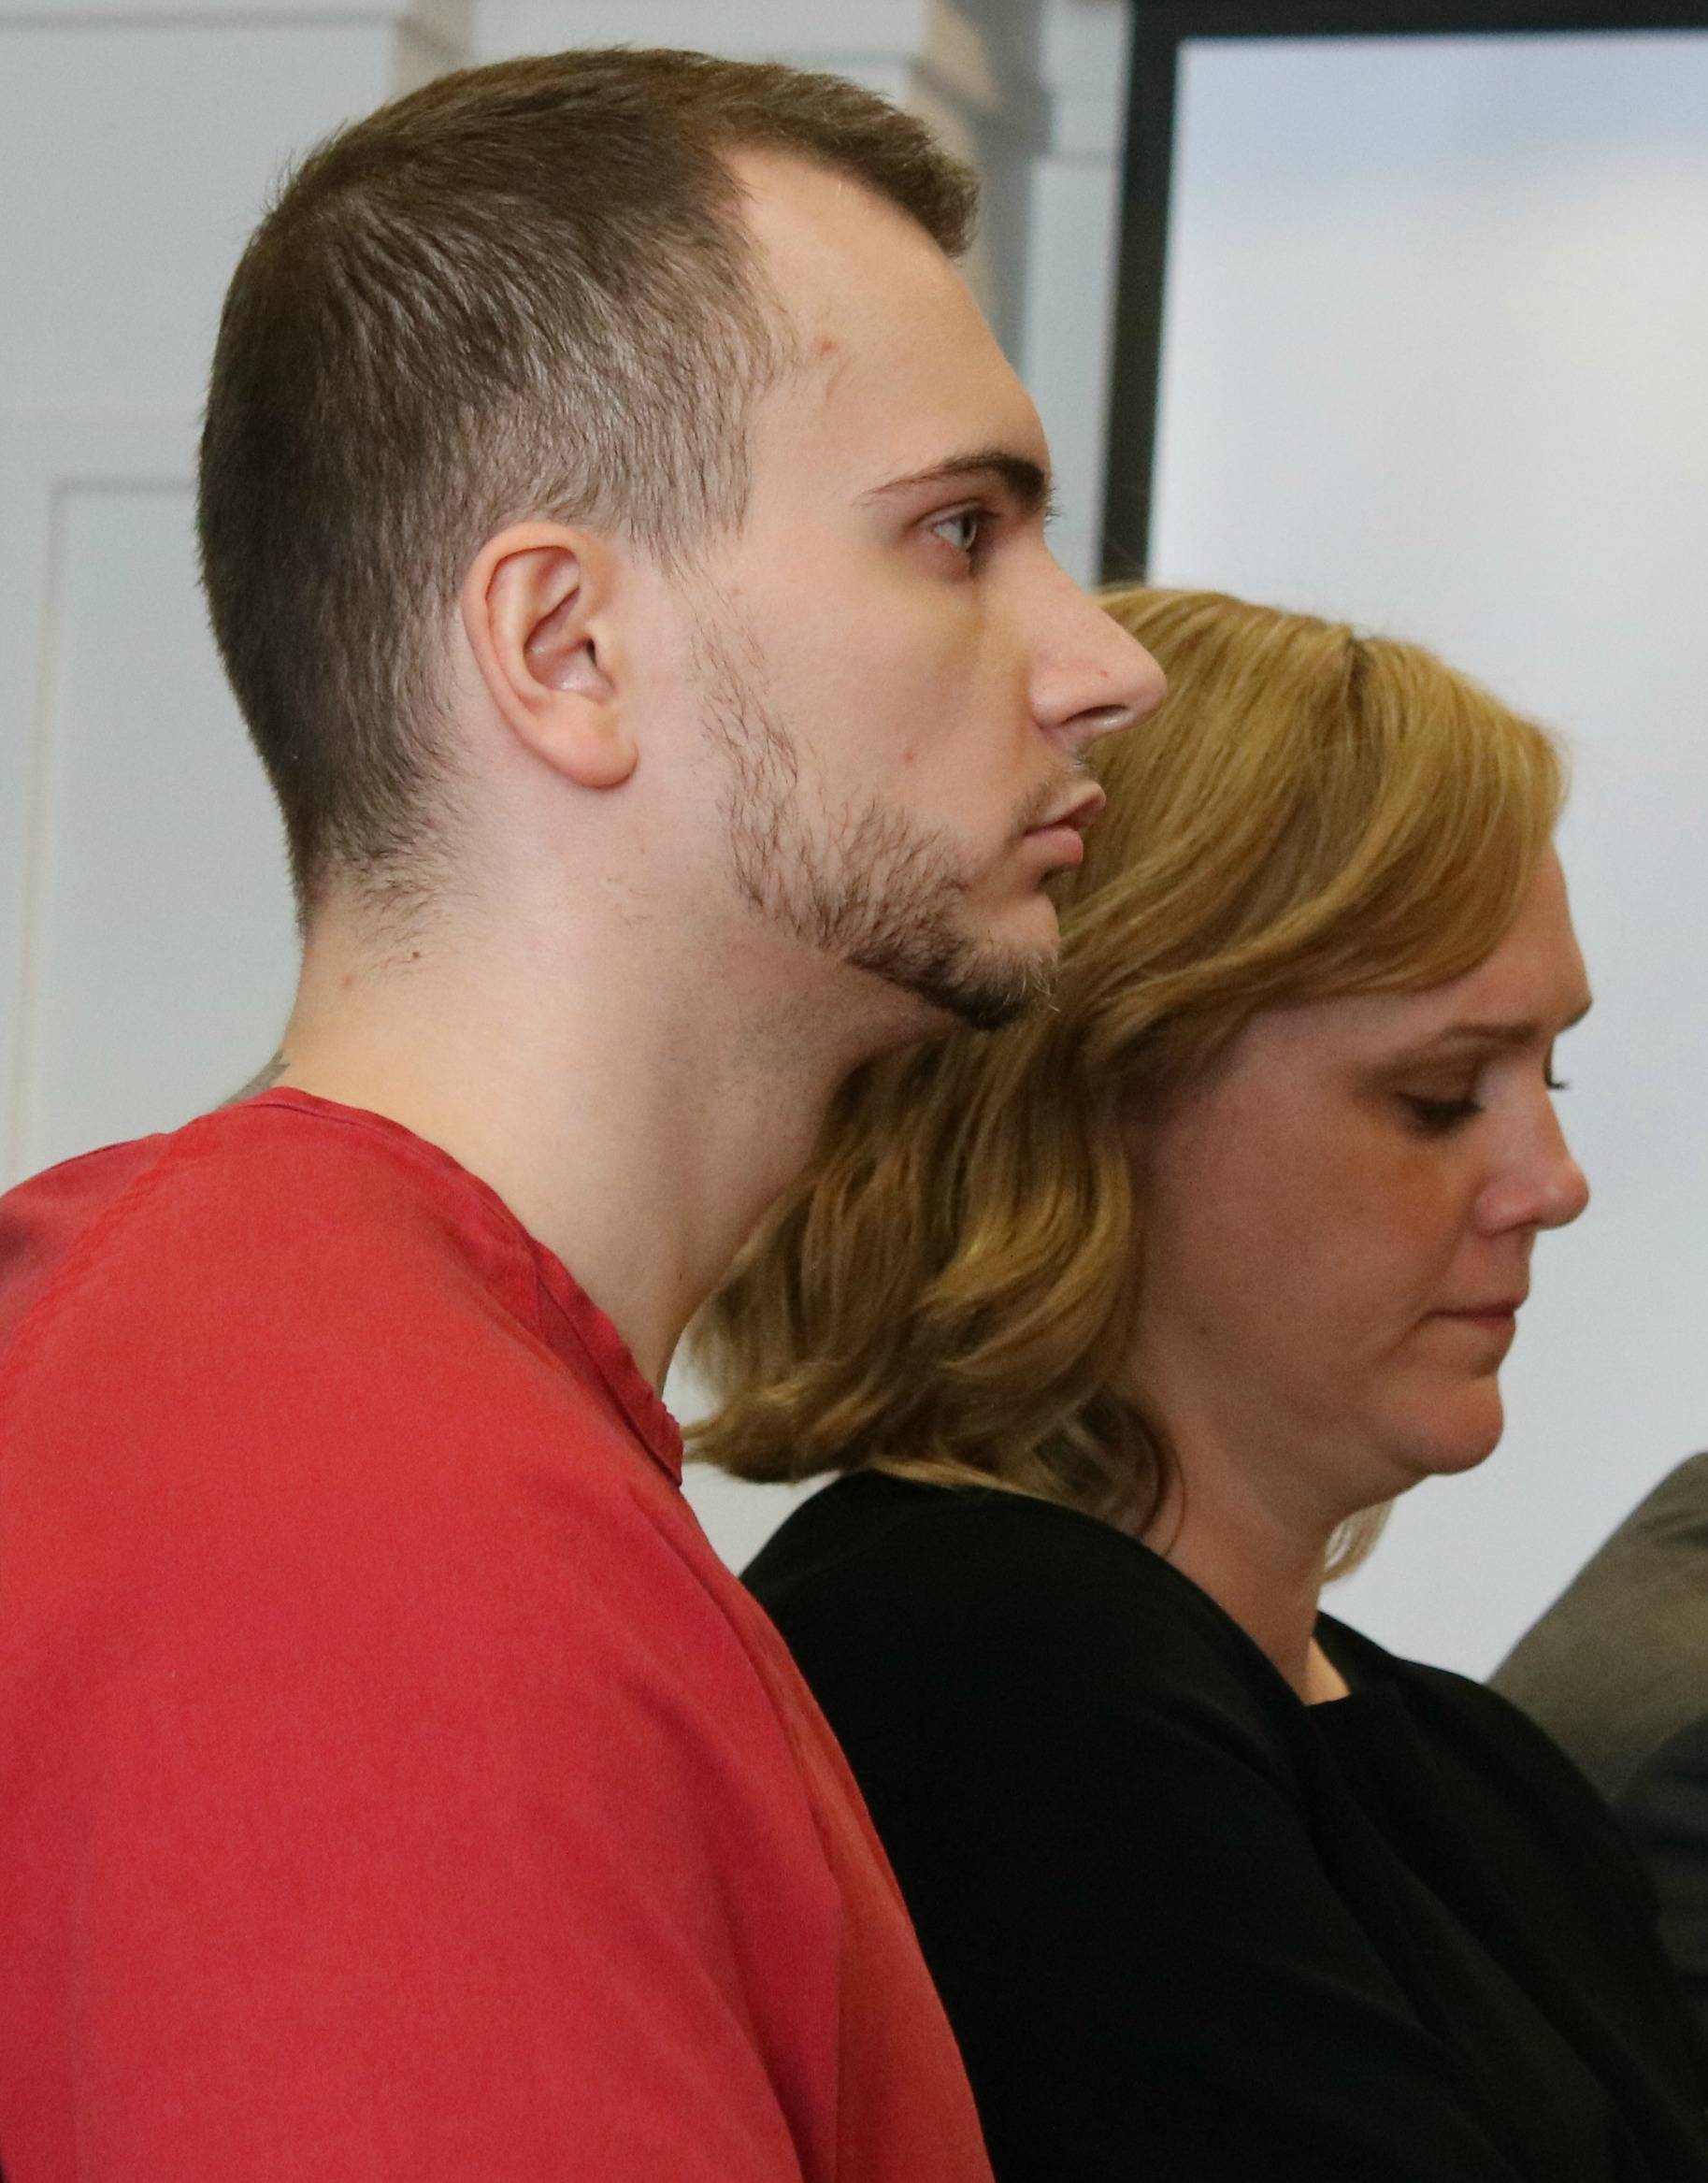 Mark Karasek listens to the judge hand down his sentence while standing next to his counsel Emma Scanlon on Friday afternoon at the King County Courthouse in Seattle. Andy Nystrom, Redmond Reporter